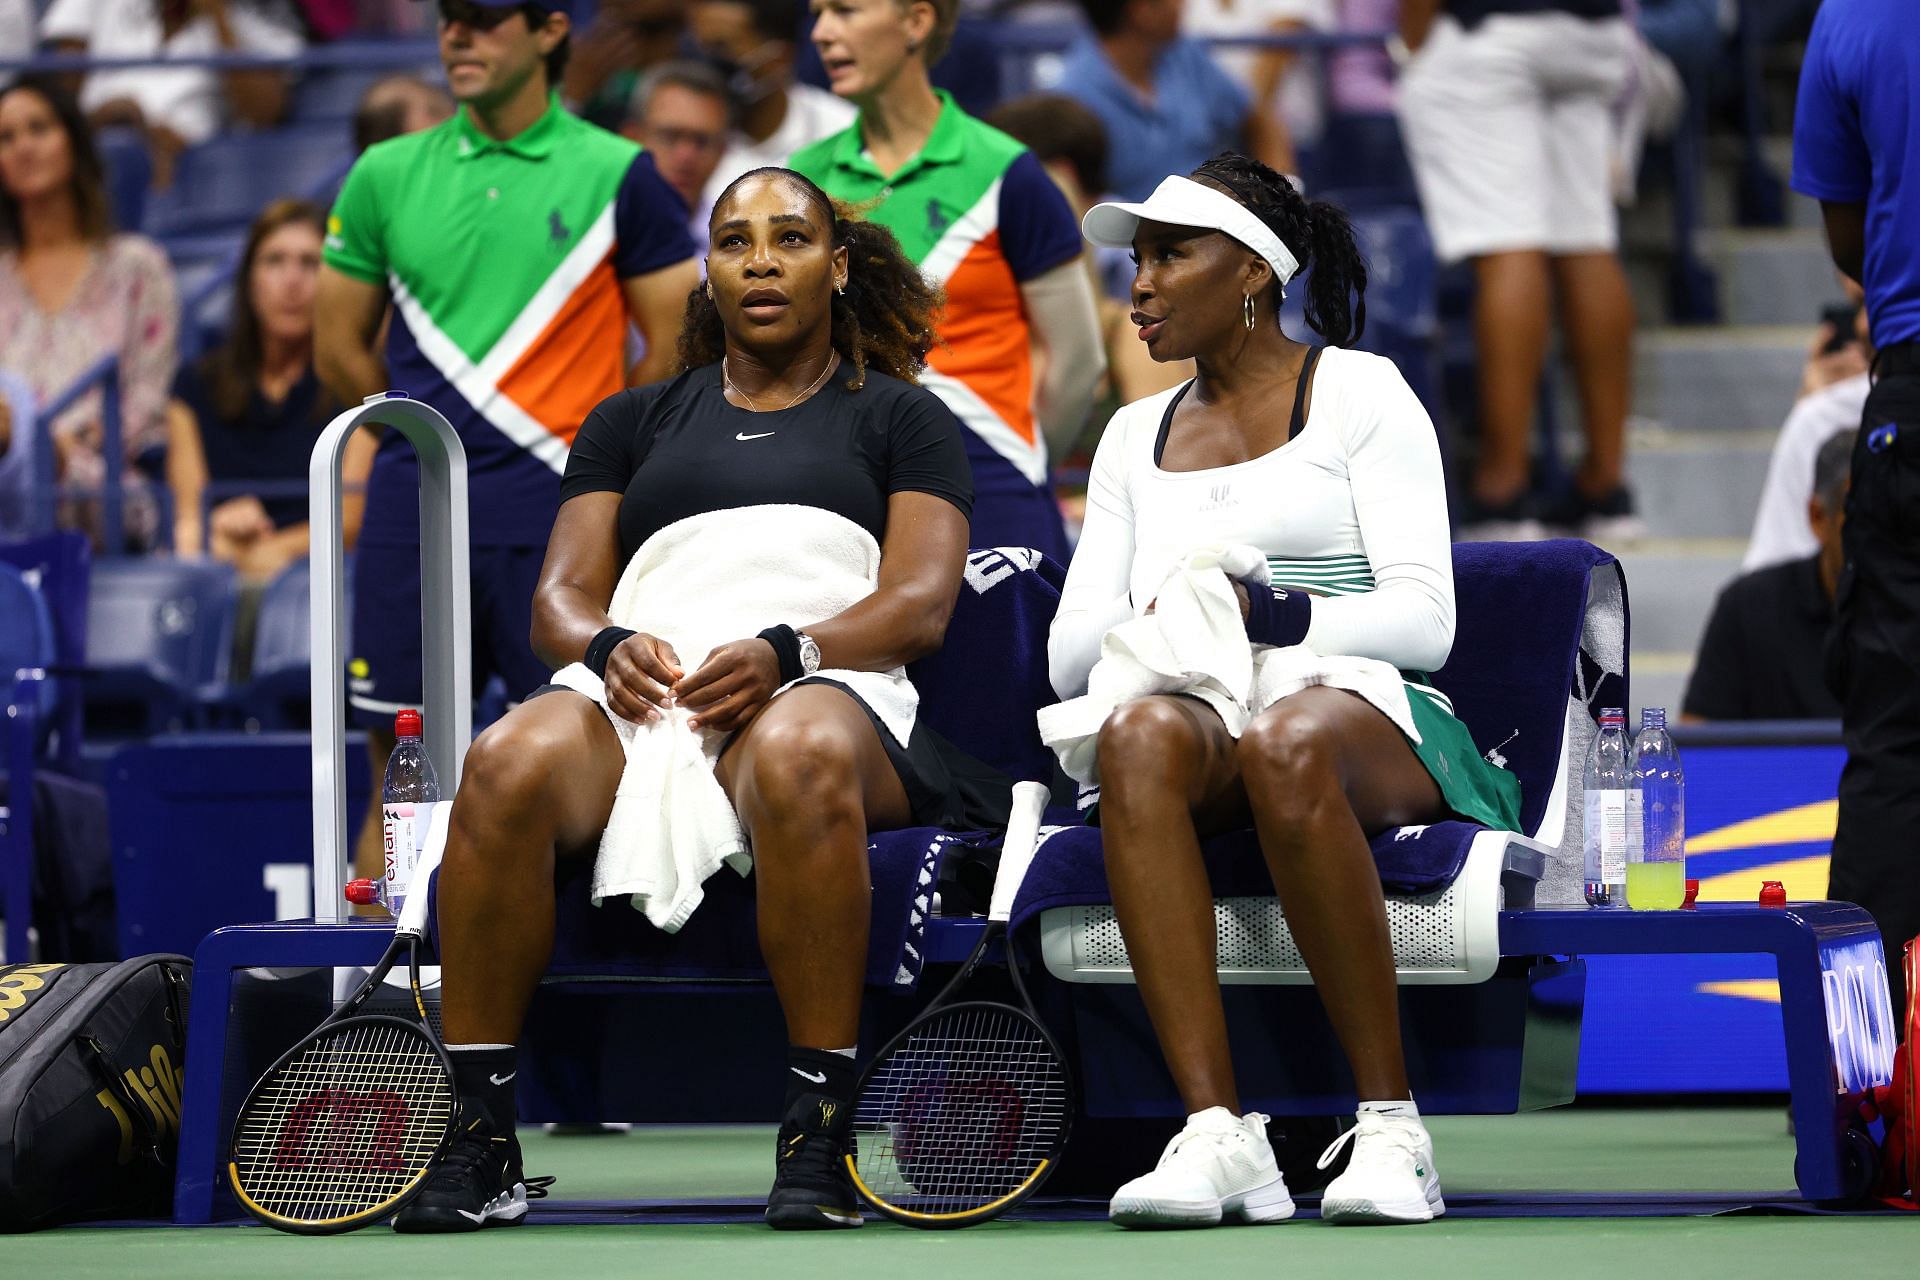 Serena and Venus Williams played doubles together at the 2022 US Open